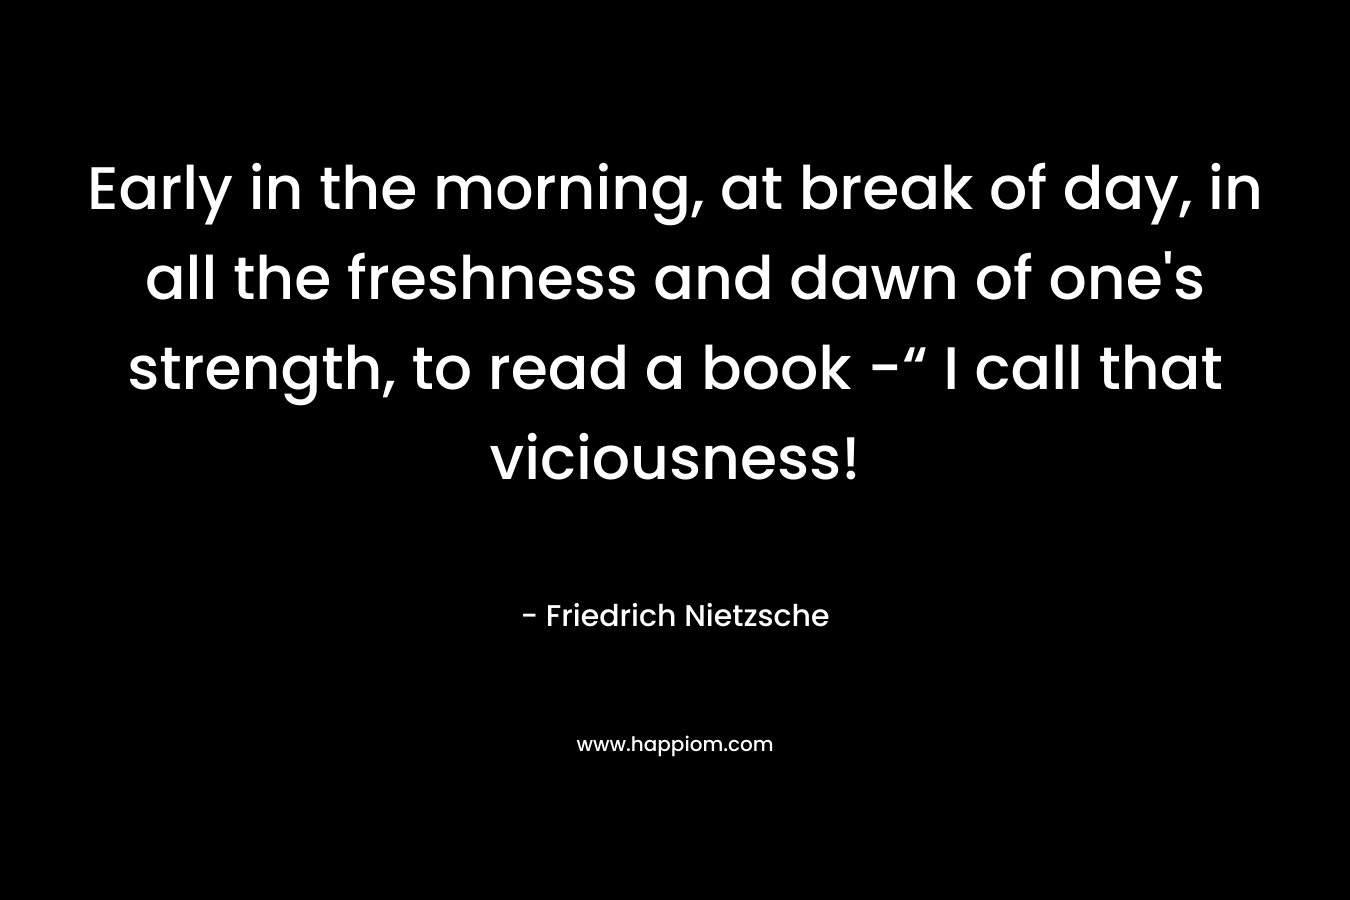 Early in the morning, at break of day, in all the freshness and dawn of one’s strength, to read a book -“ I call that viciousness! – Friedrich Nietzsche